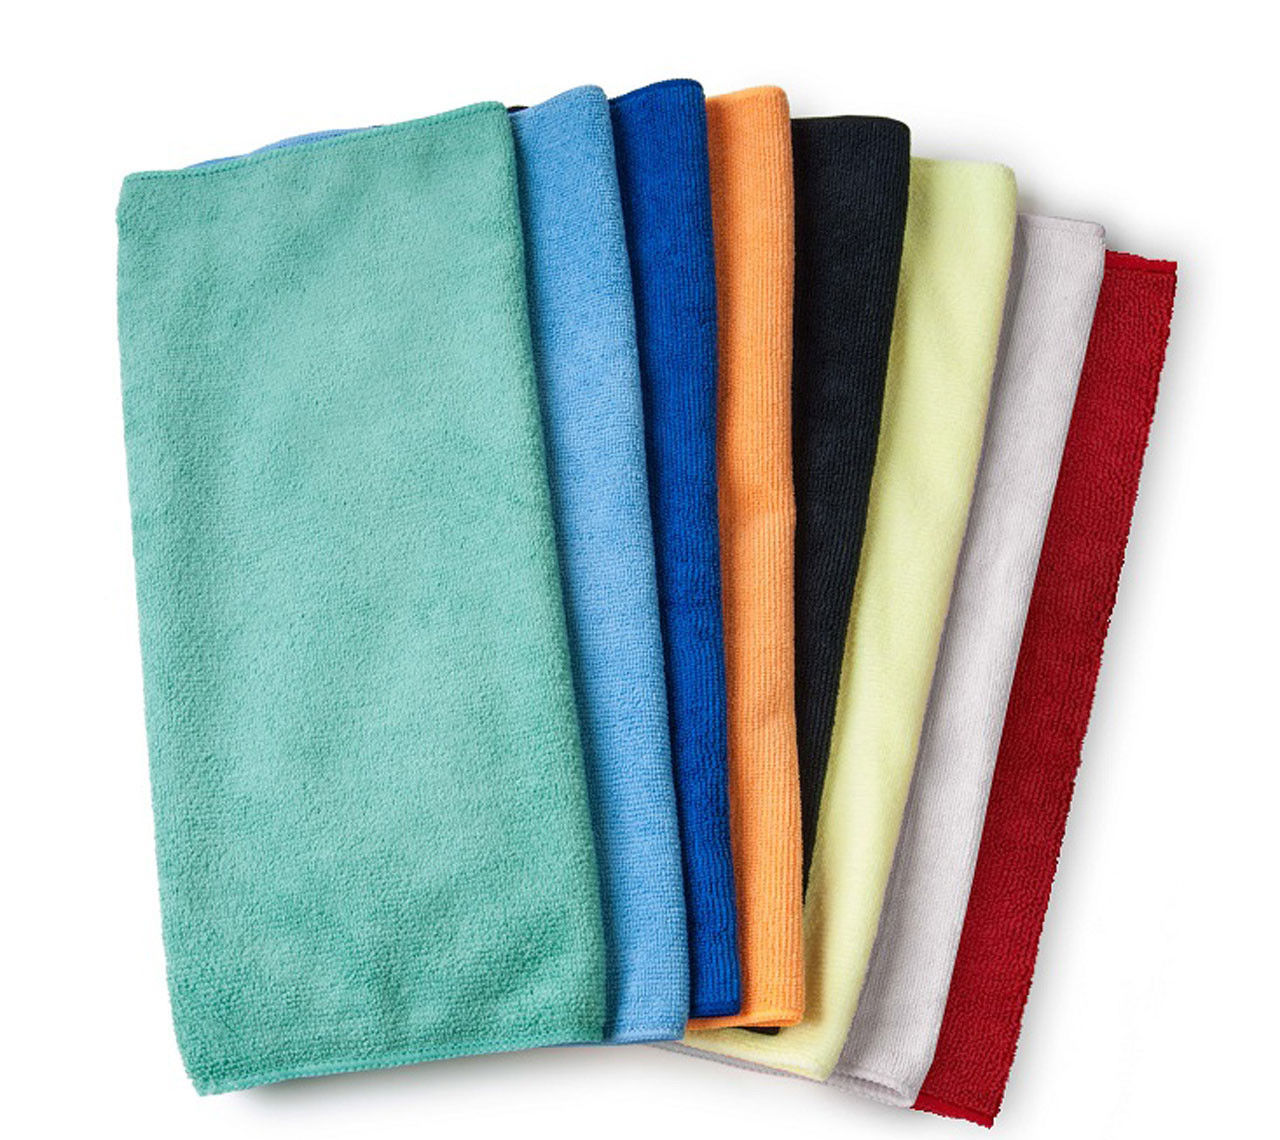 Do golf towels bulk have safety features for allergy or asthma sufferers?